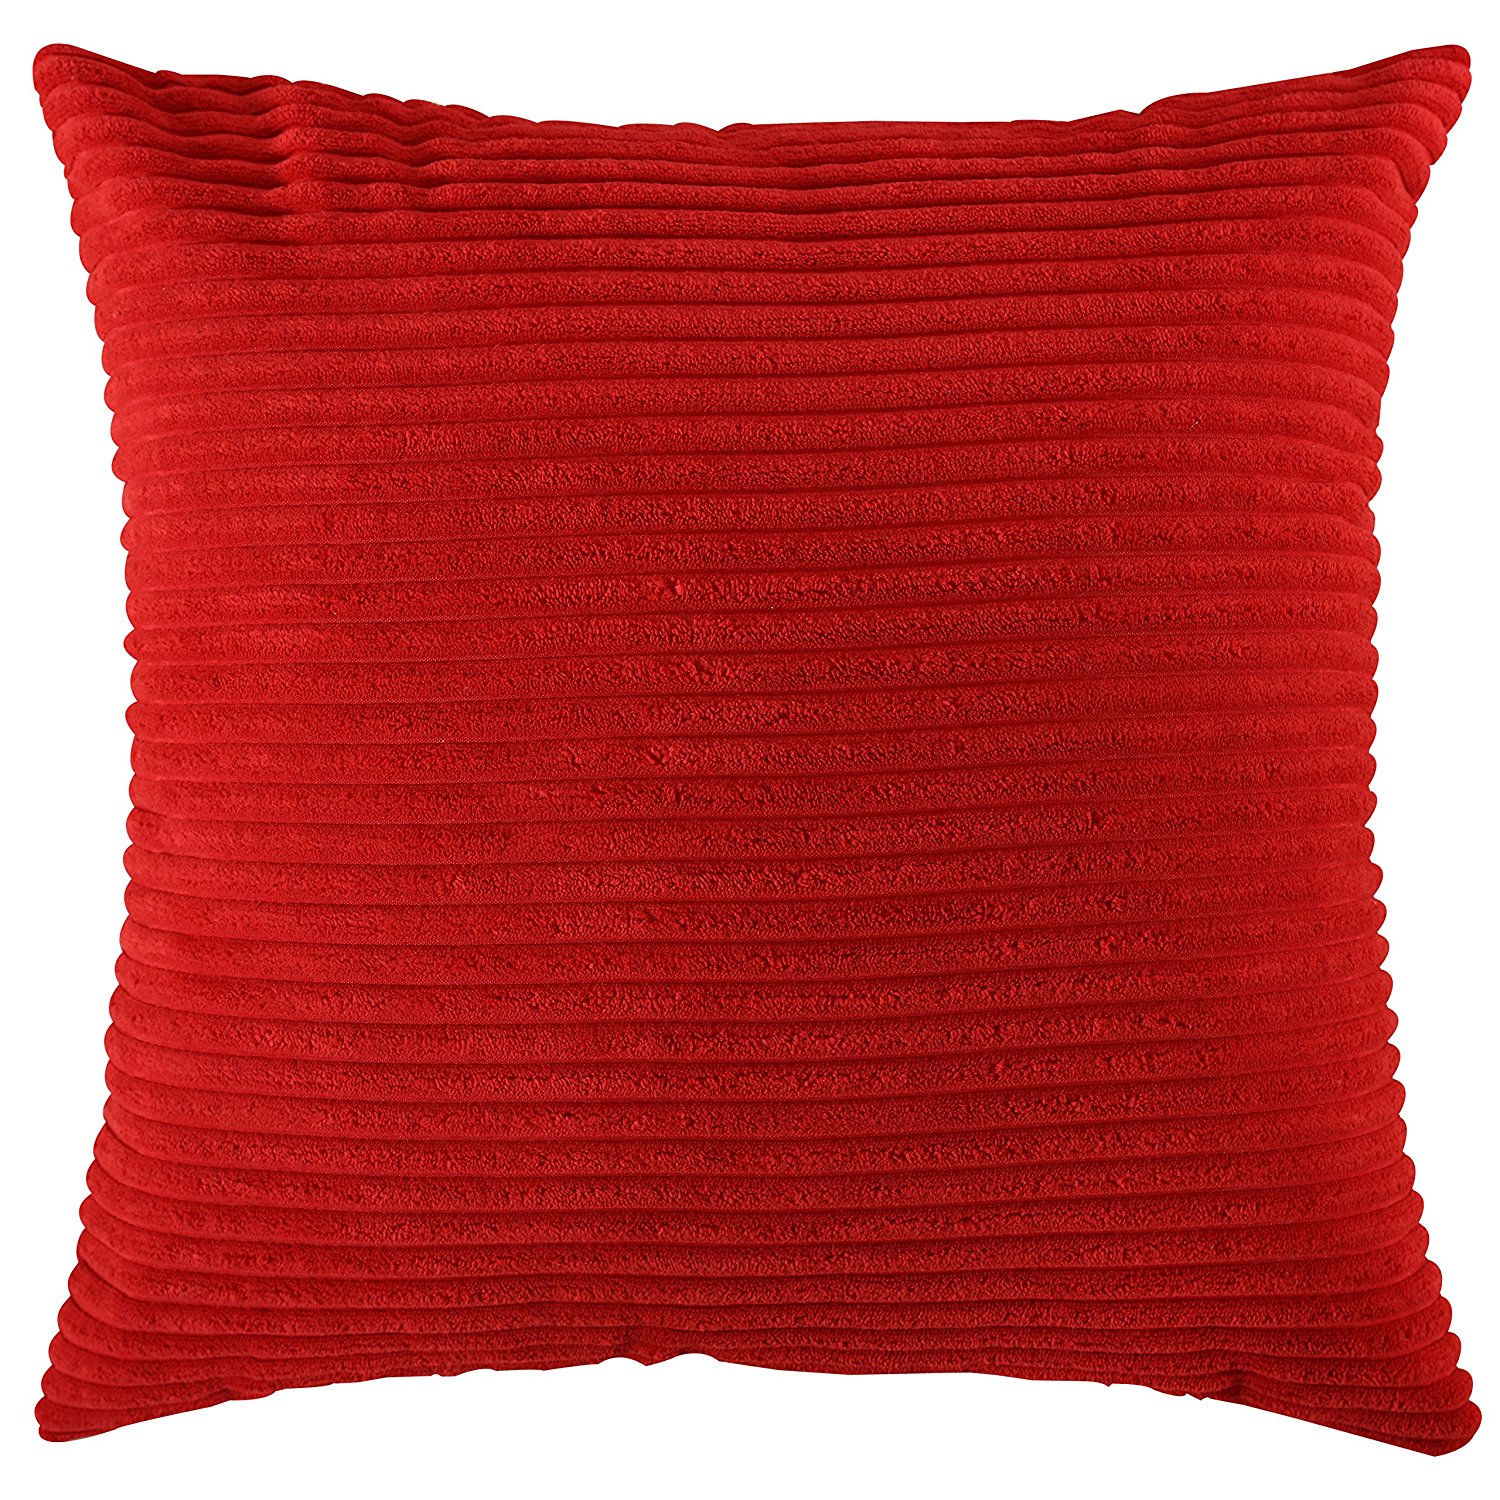 Home Brilliant Spring Decoration Solid Red Soft Striped Velvet Corduroy Plush Throw Cushion Cover for Square Pillow (Red, 18 x 18 inch, 45cm)